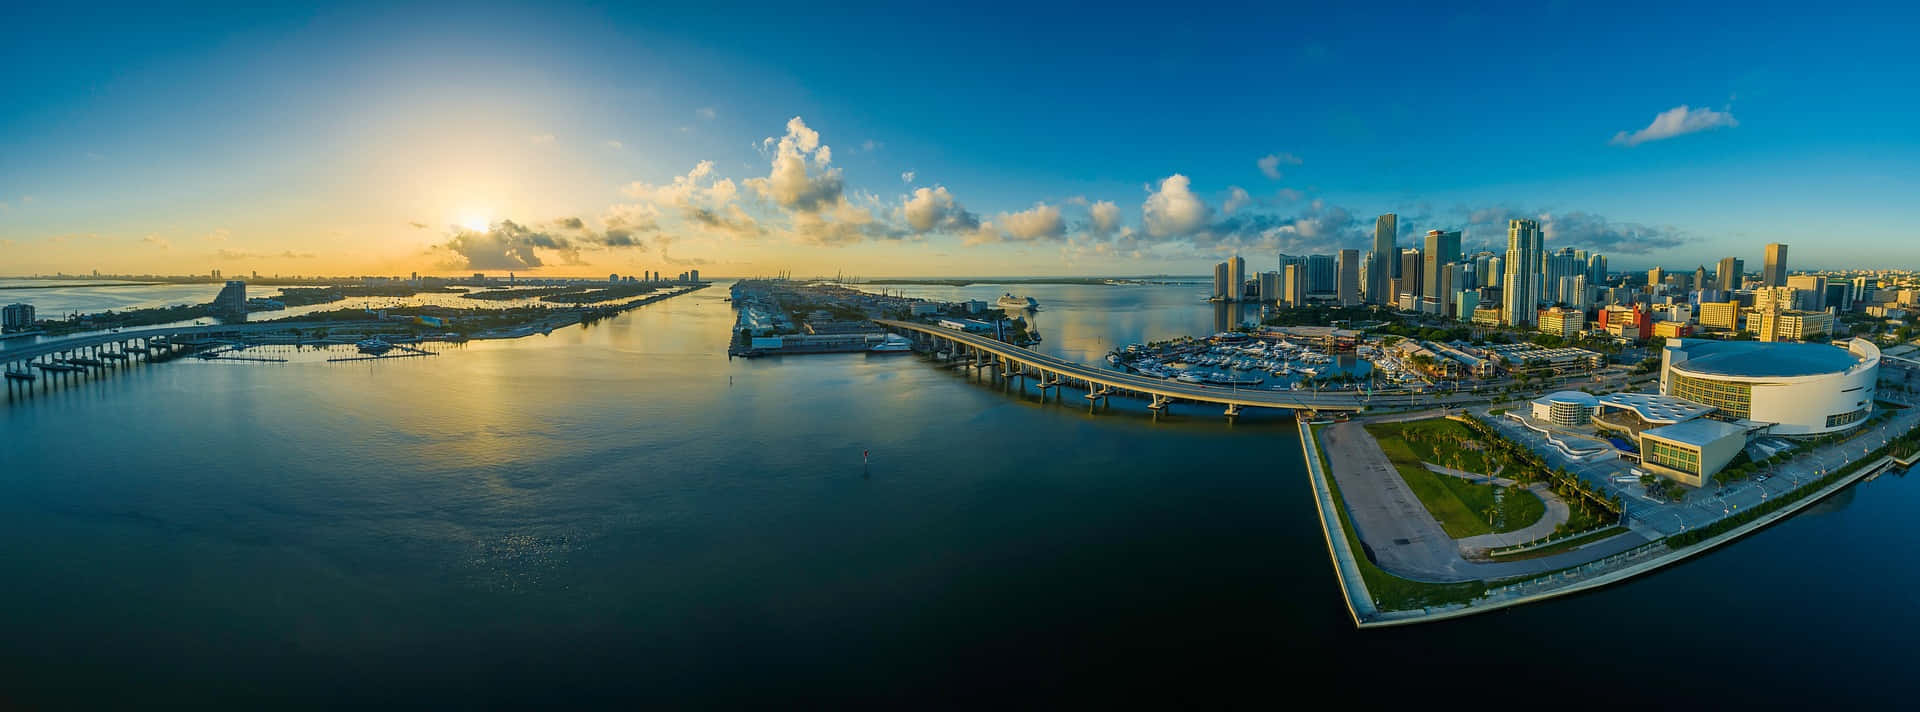 Cool Miami City Panoramic Picture